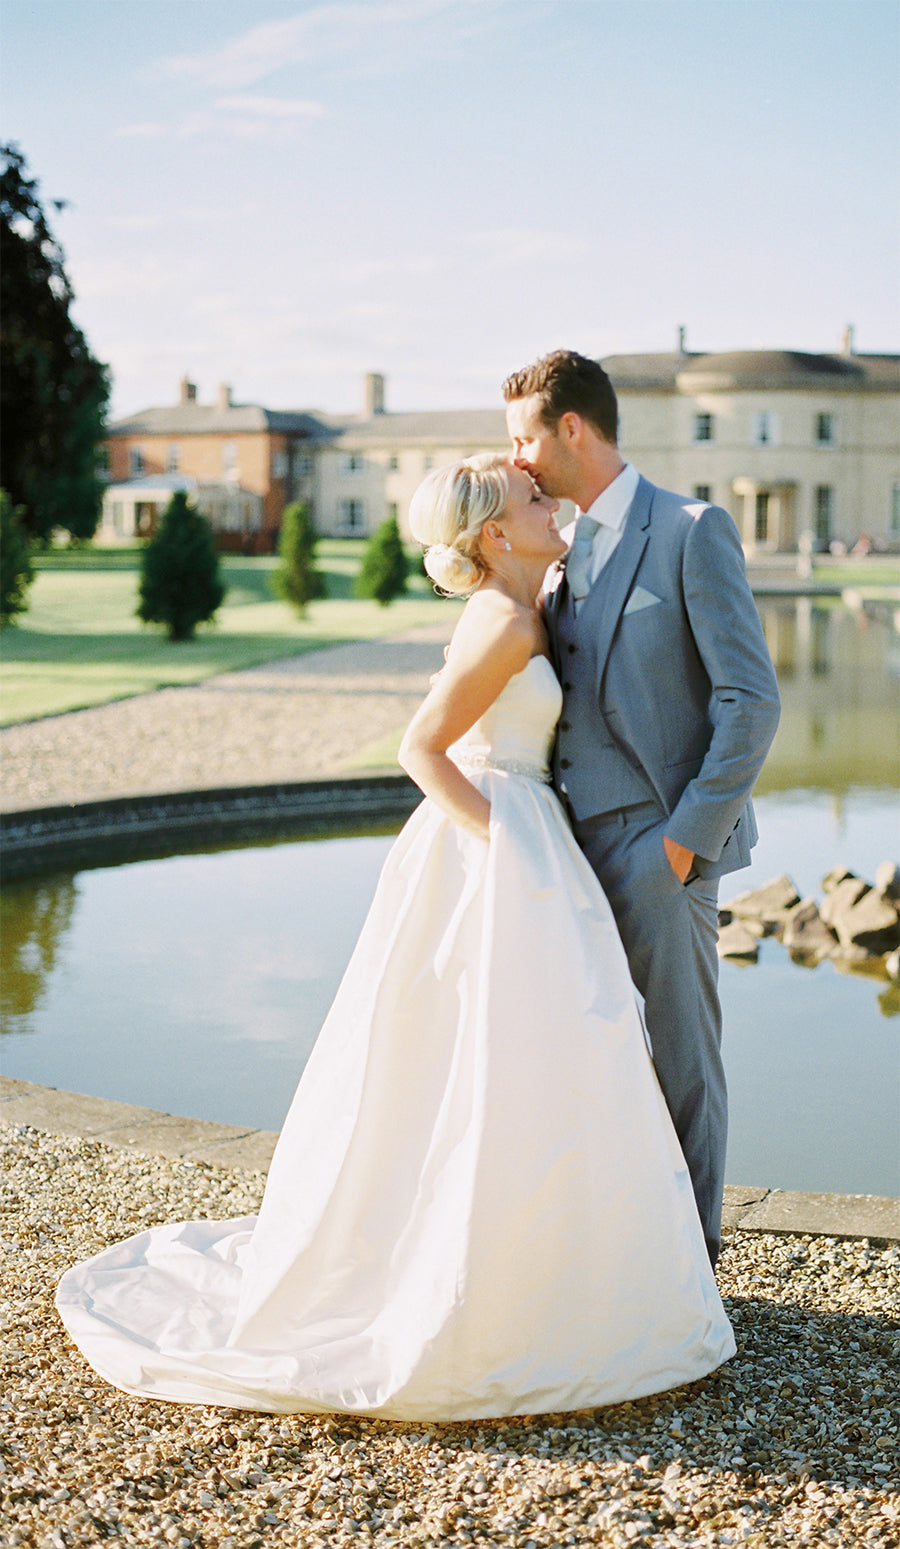 Natalie marries in the romantic Rosabella Dress